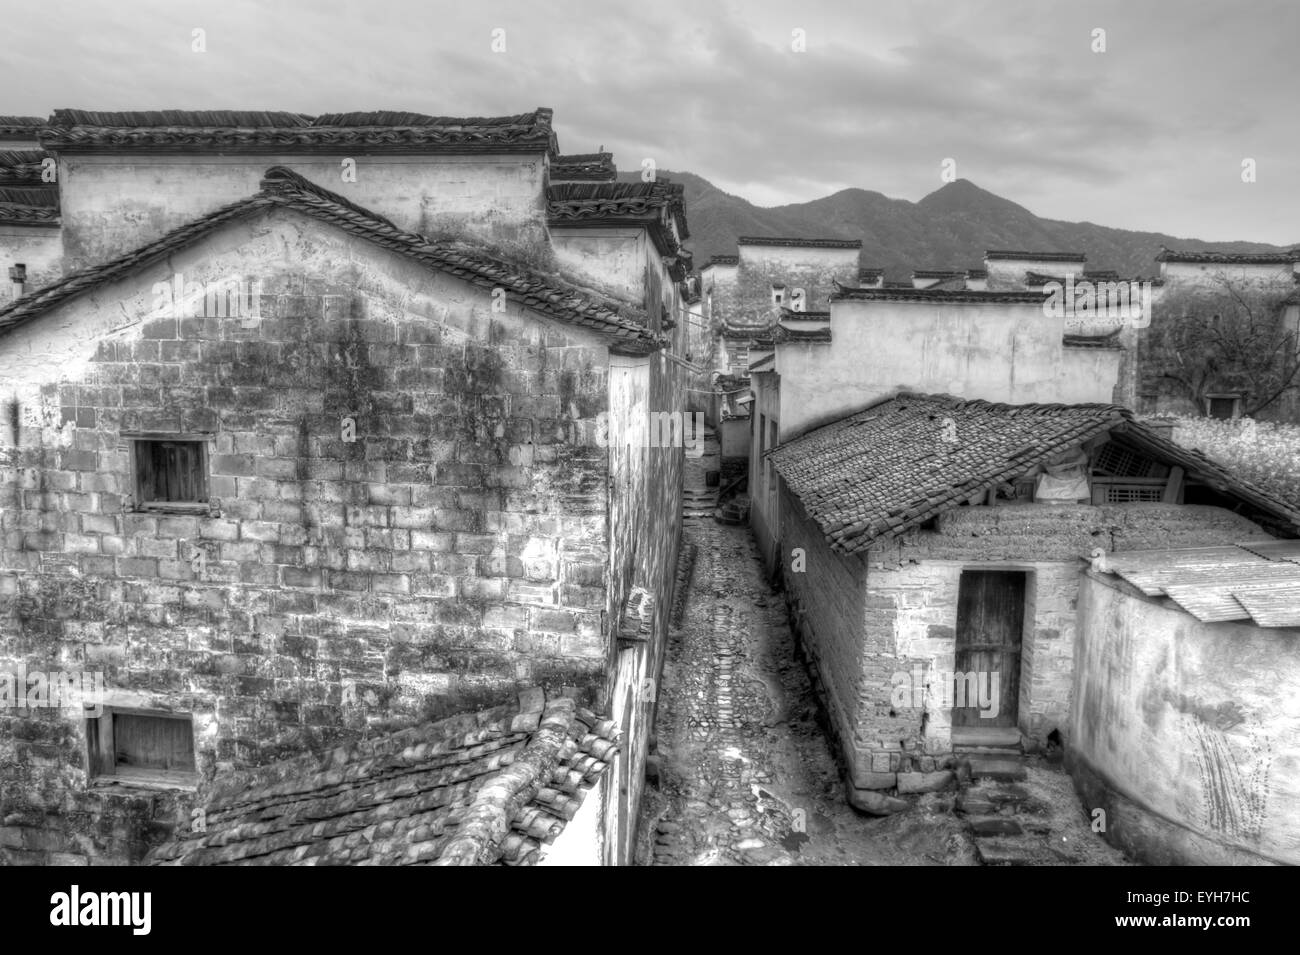 Ancient buildings in Anhui province, China. black and white tone. Stock Photo